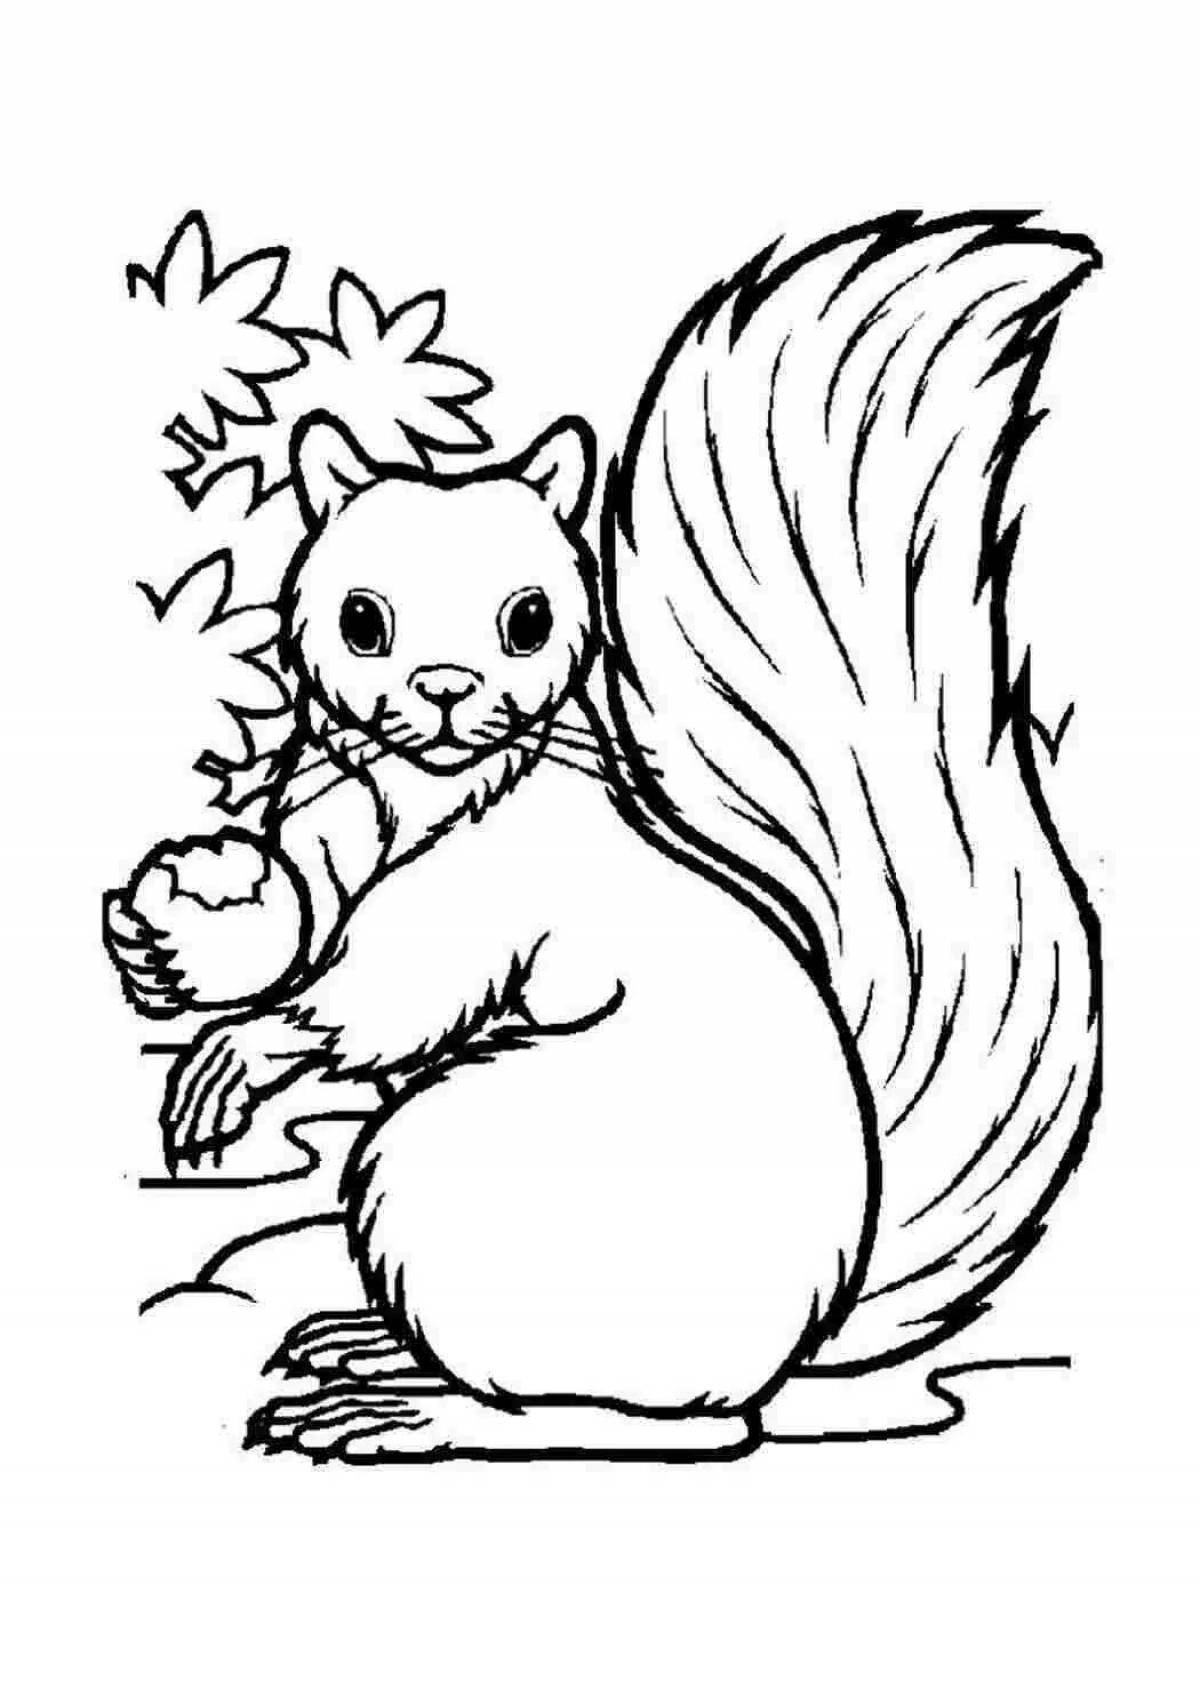 Happy drawing of a squirrel